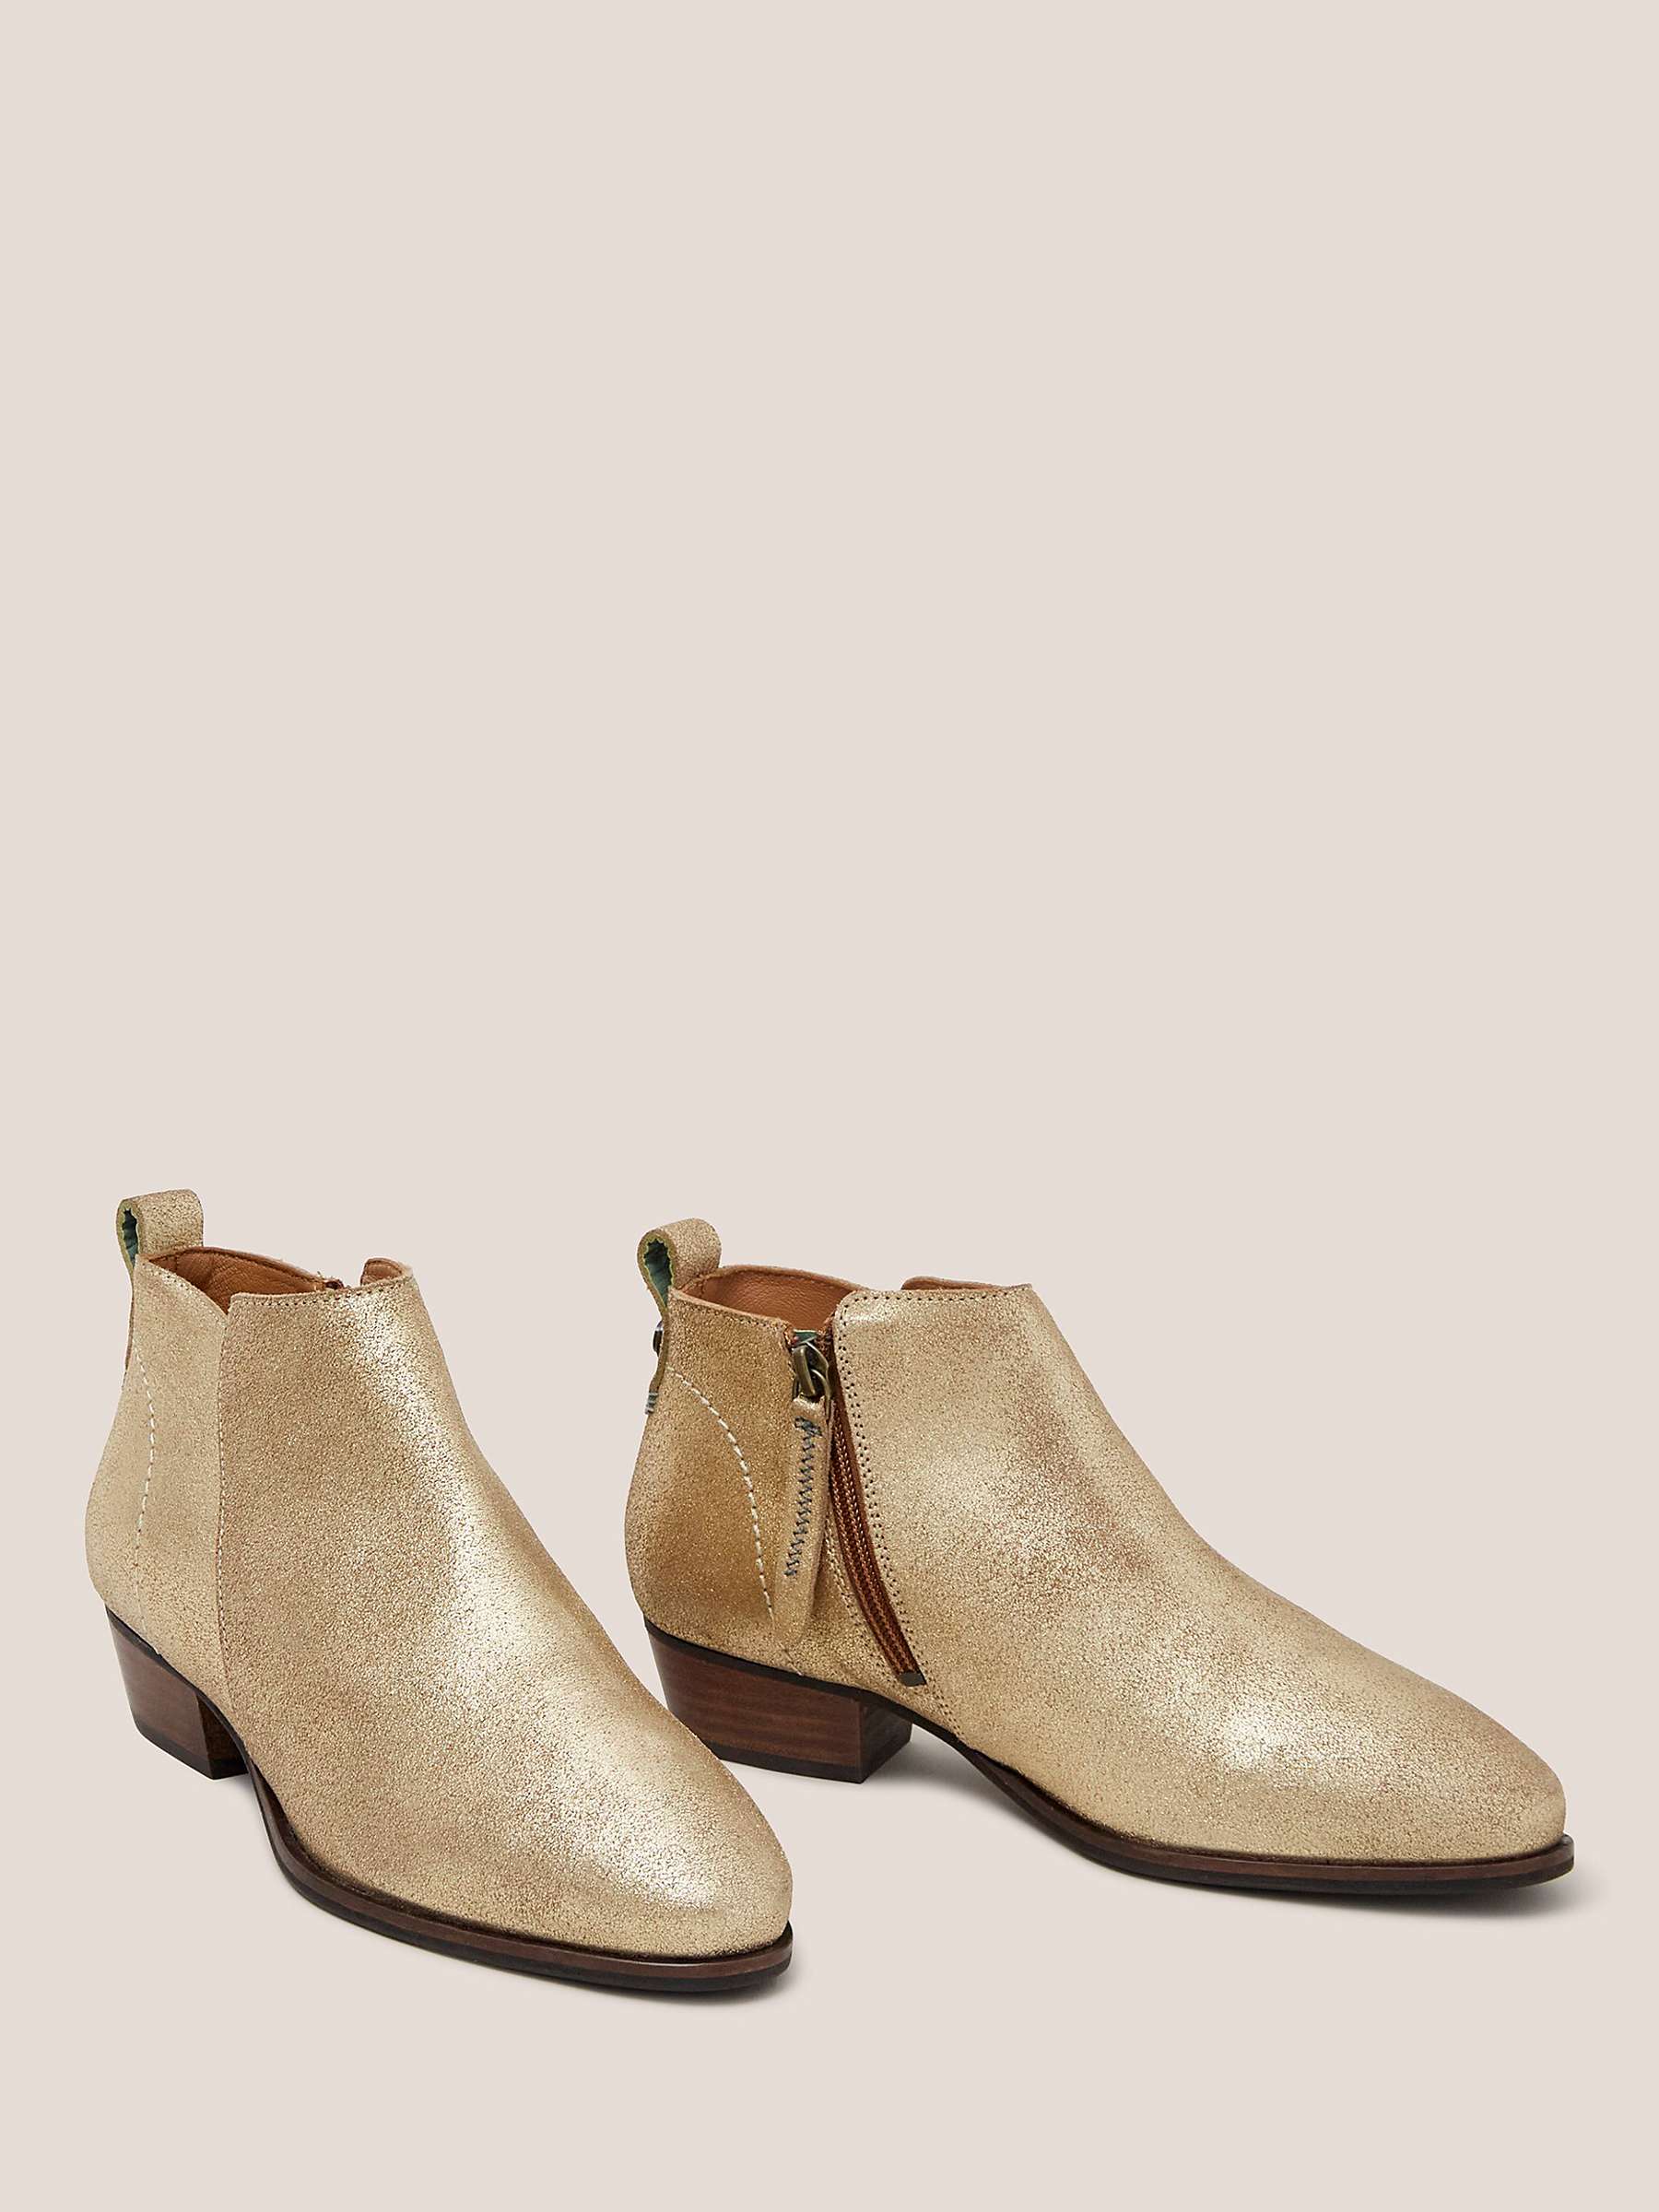 Buy White Stuff Willow Leather Shoe Boots, Gold Online at johnlewis.com